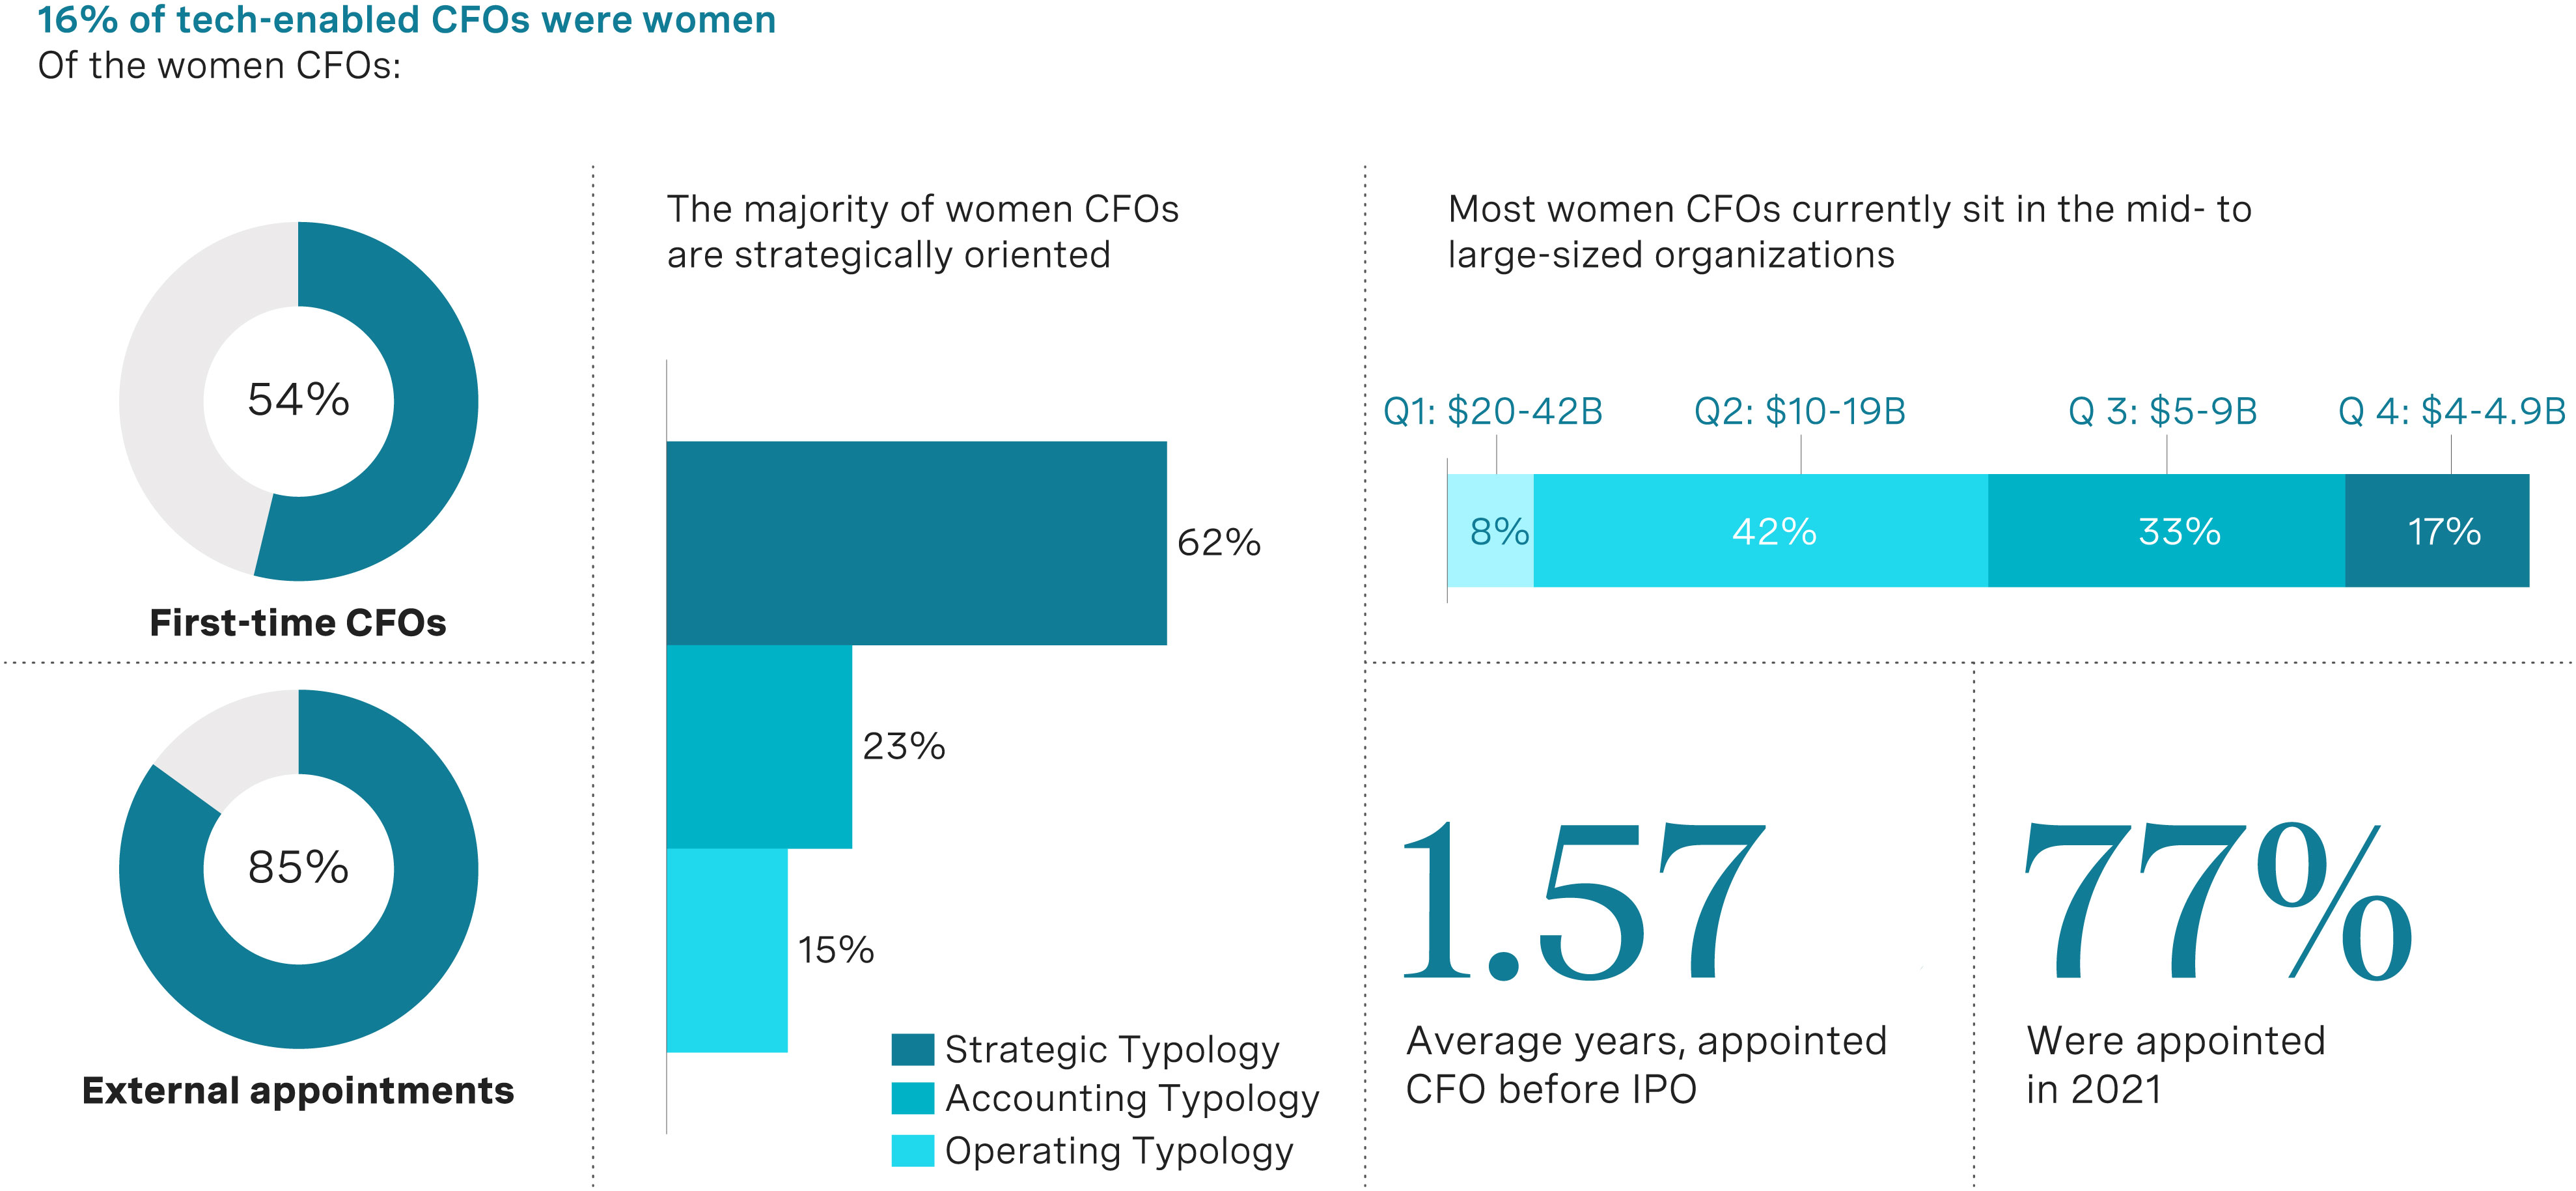 Overview of women tech-enabled IPO CFOs 